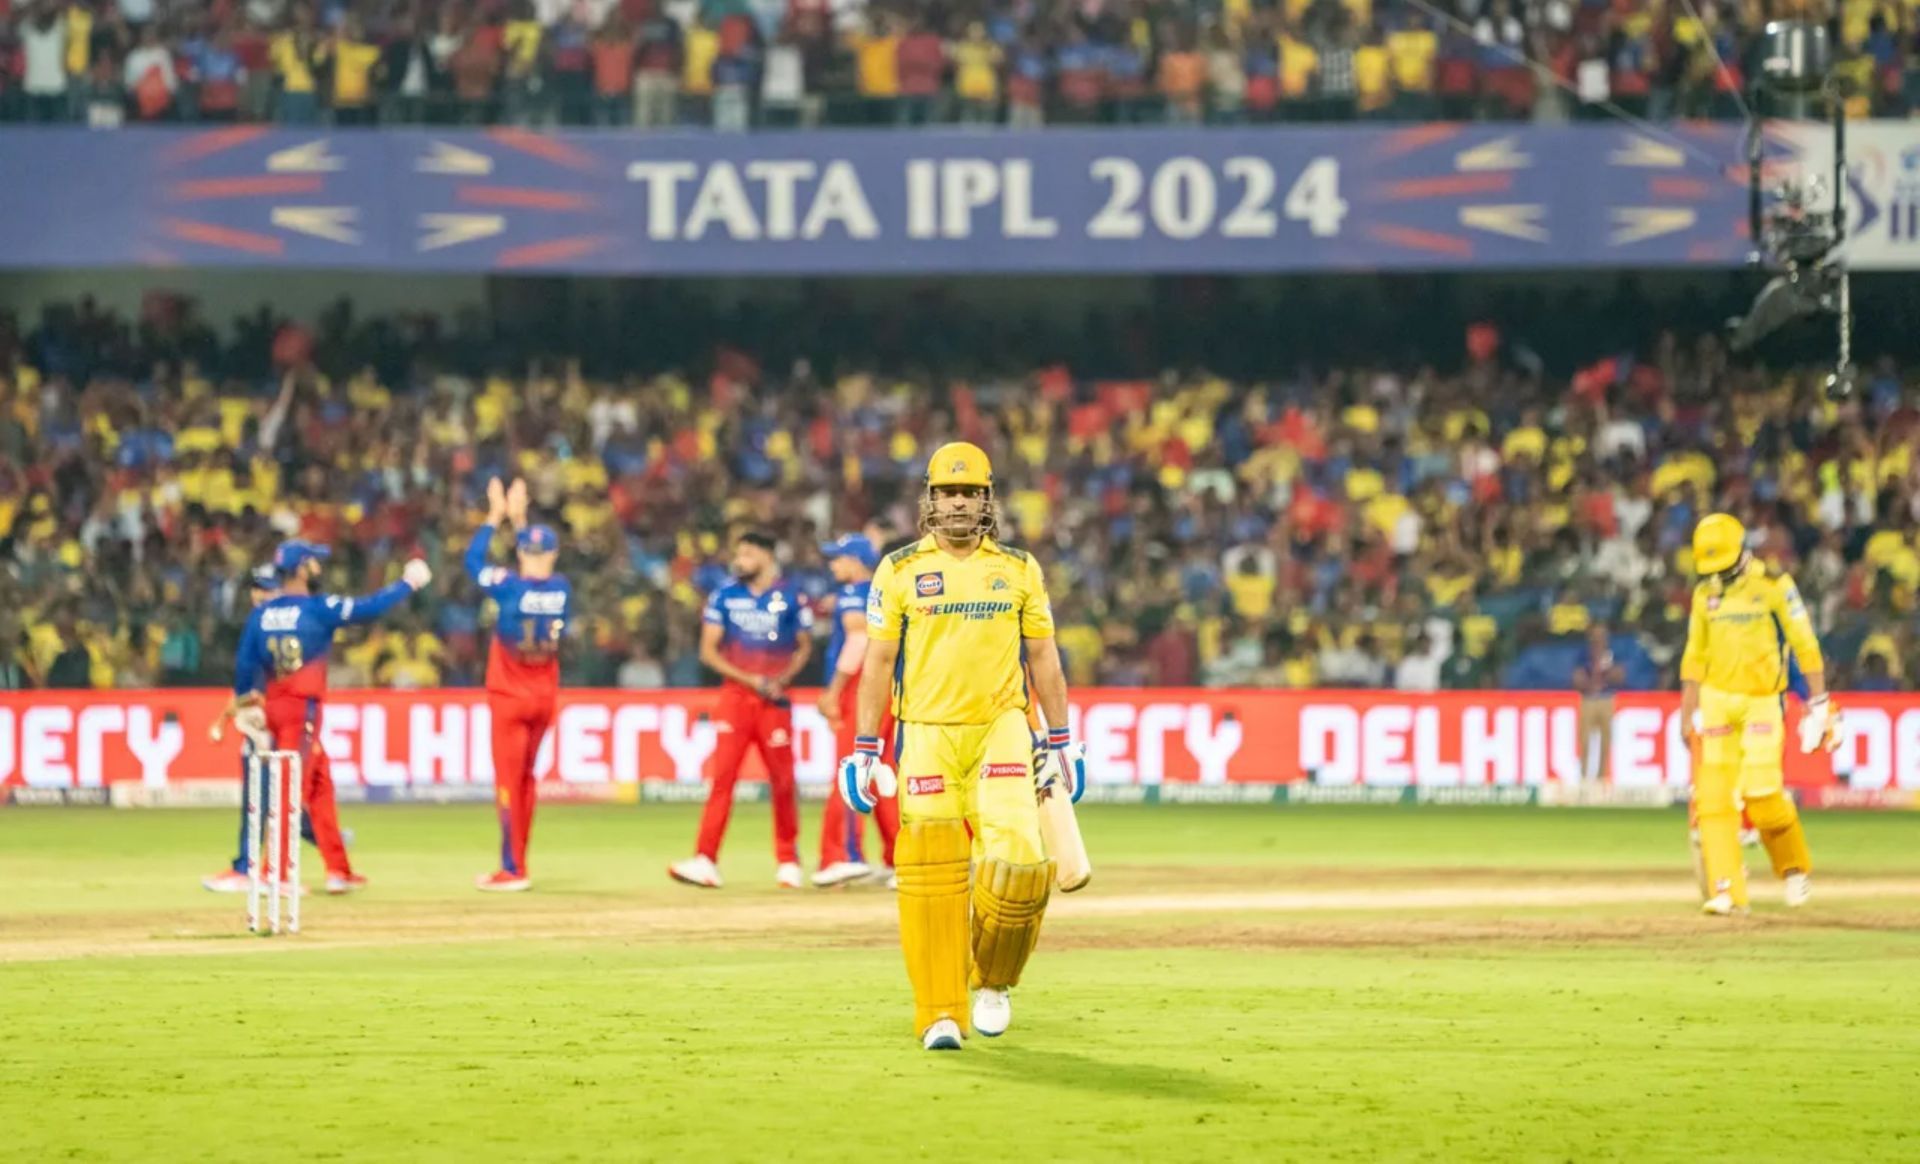 MS Dhoni after getting out in the IPL 2024 match vs RCB on Saturday. (PC: BCCI)